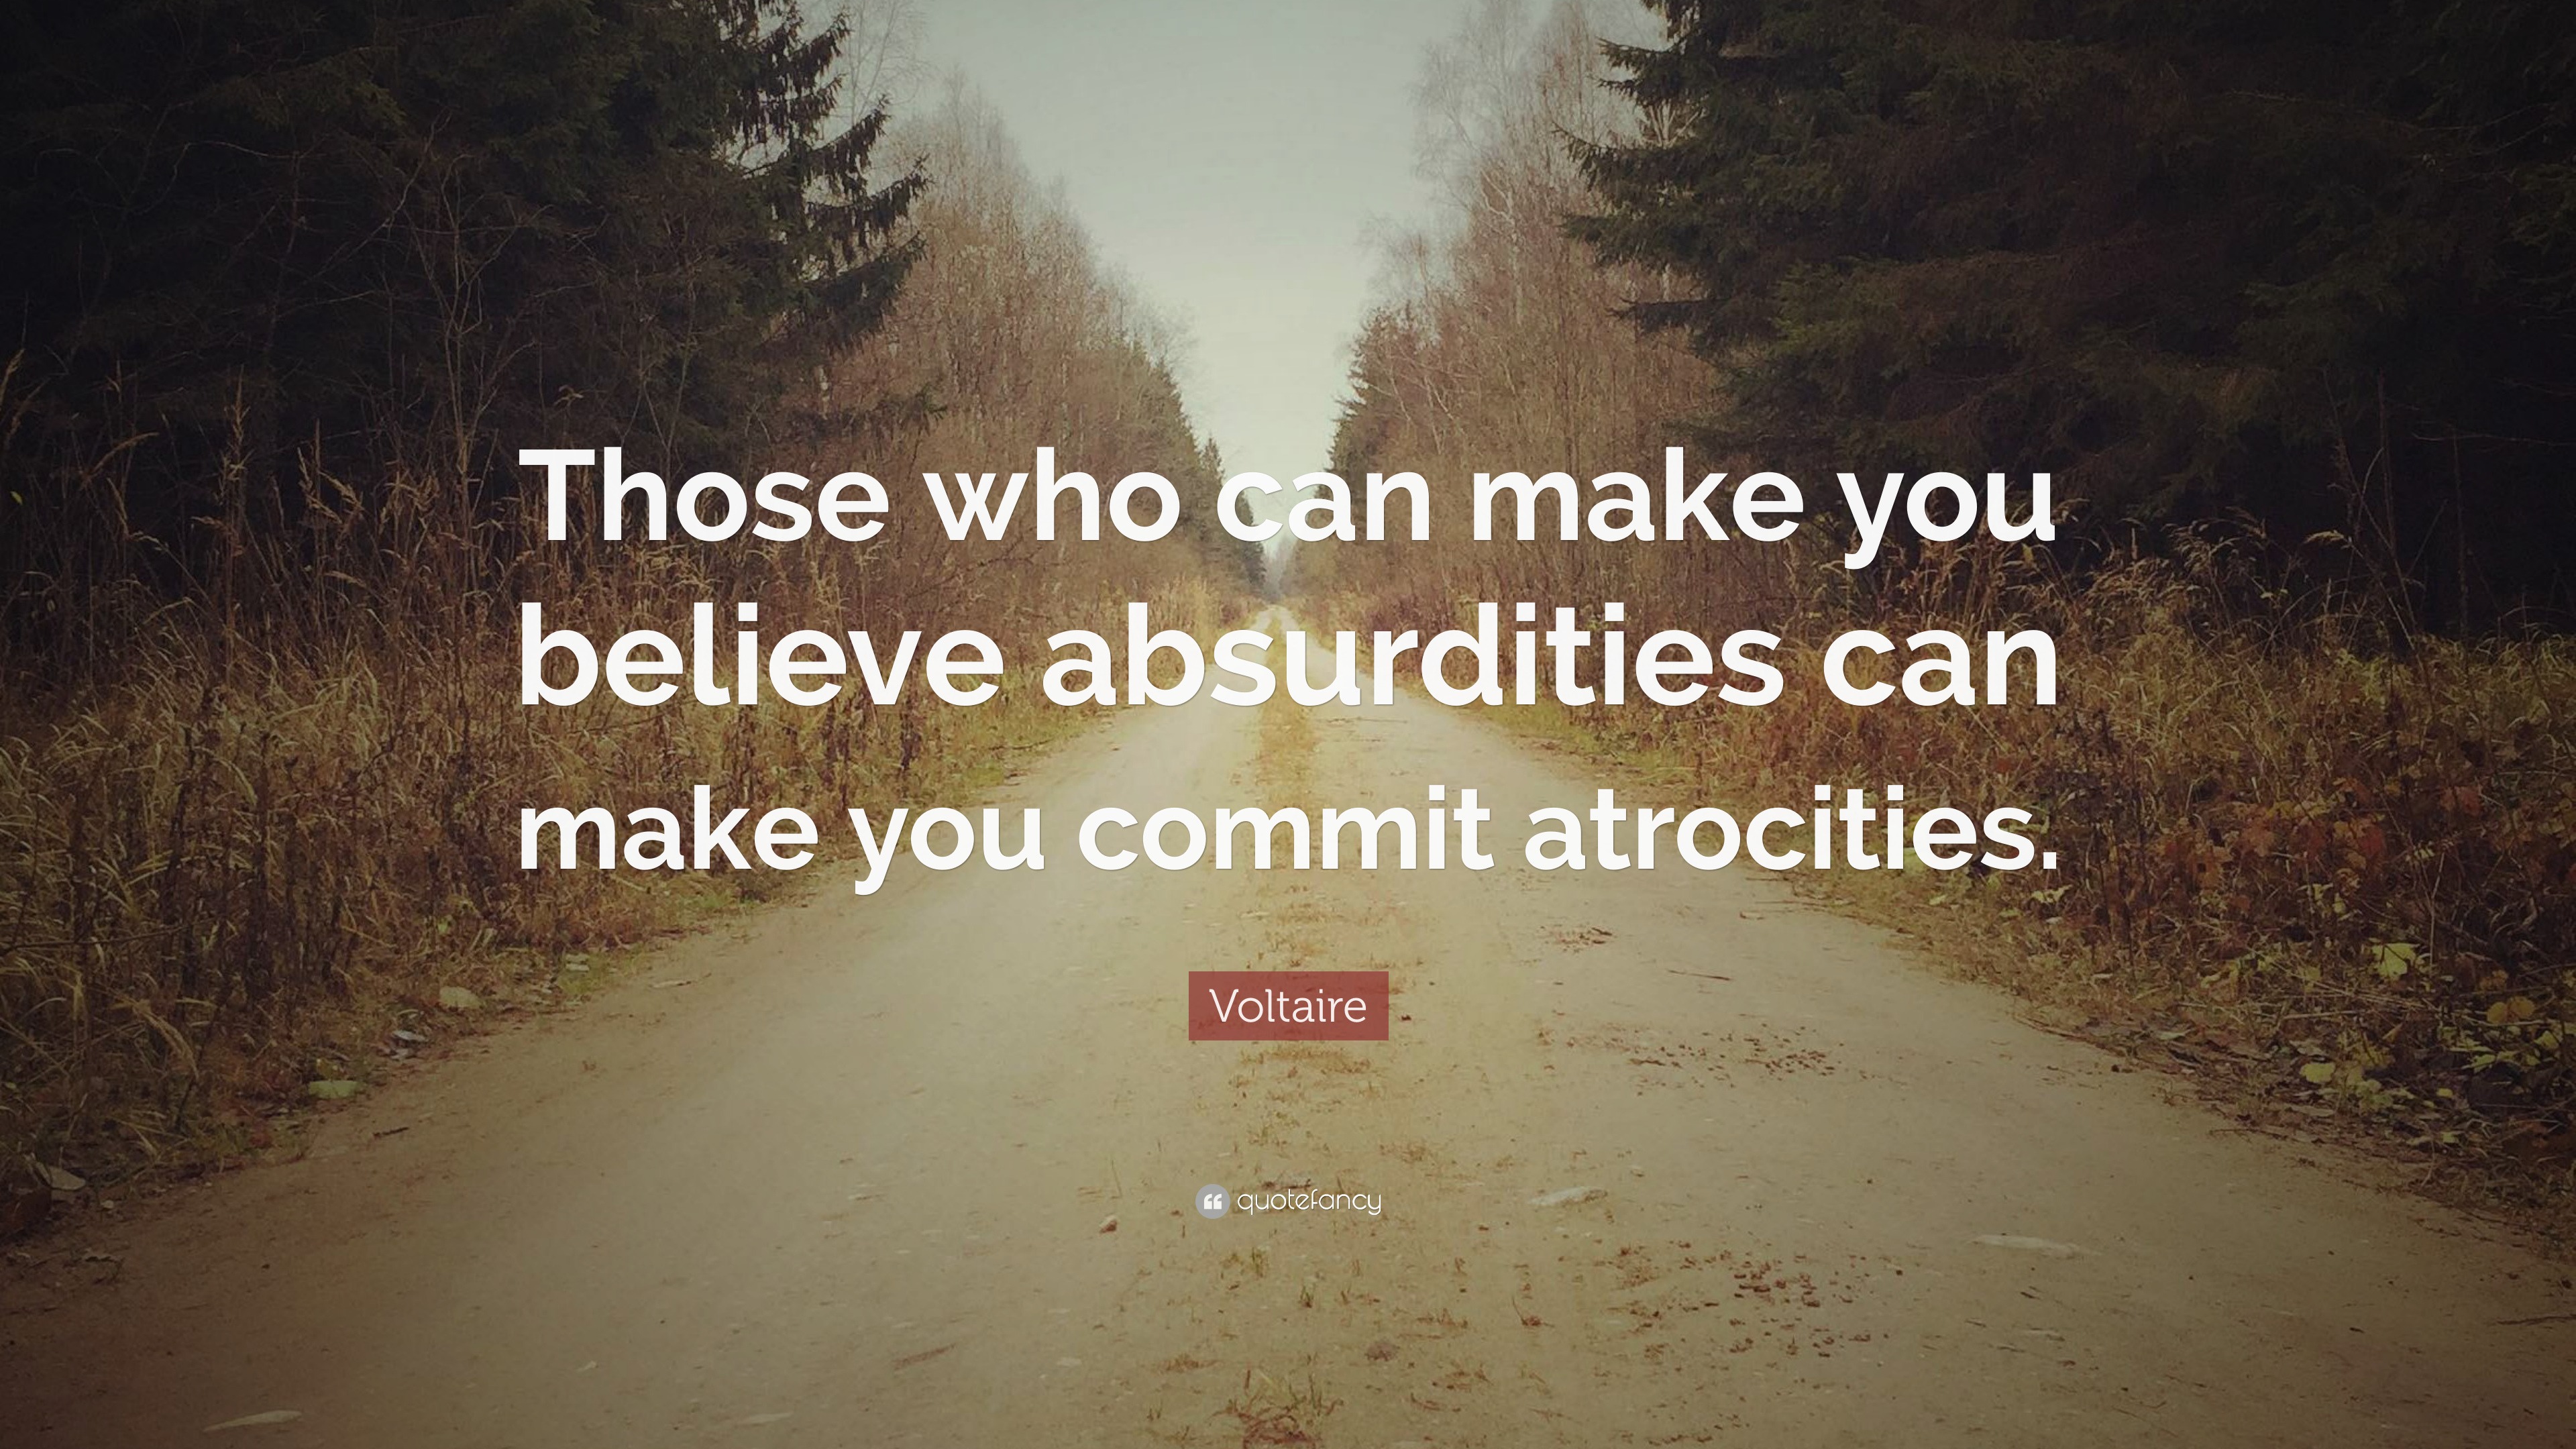 Voltaire Quote: “Those who can make you believe absurdities can make